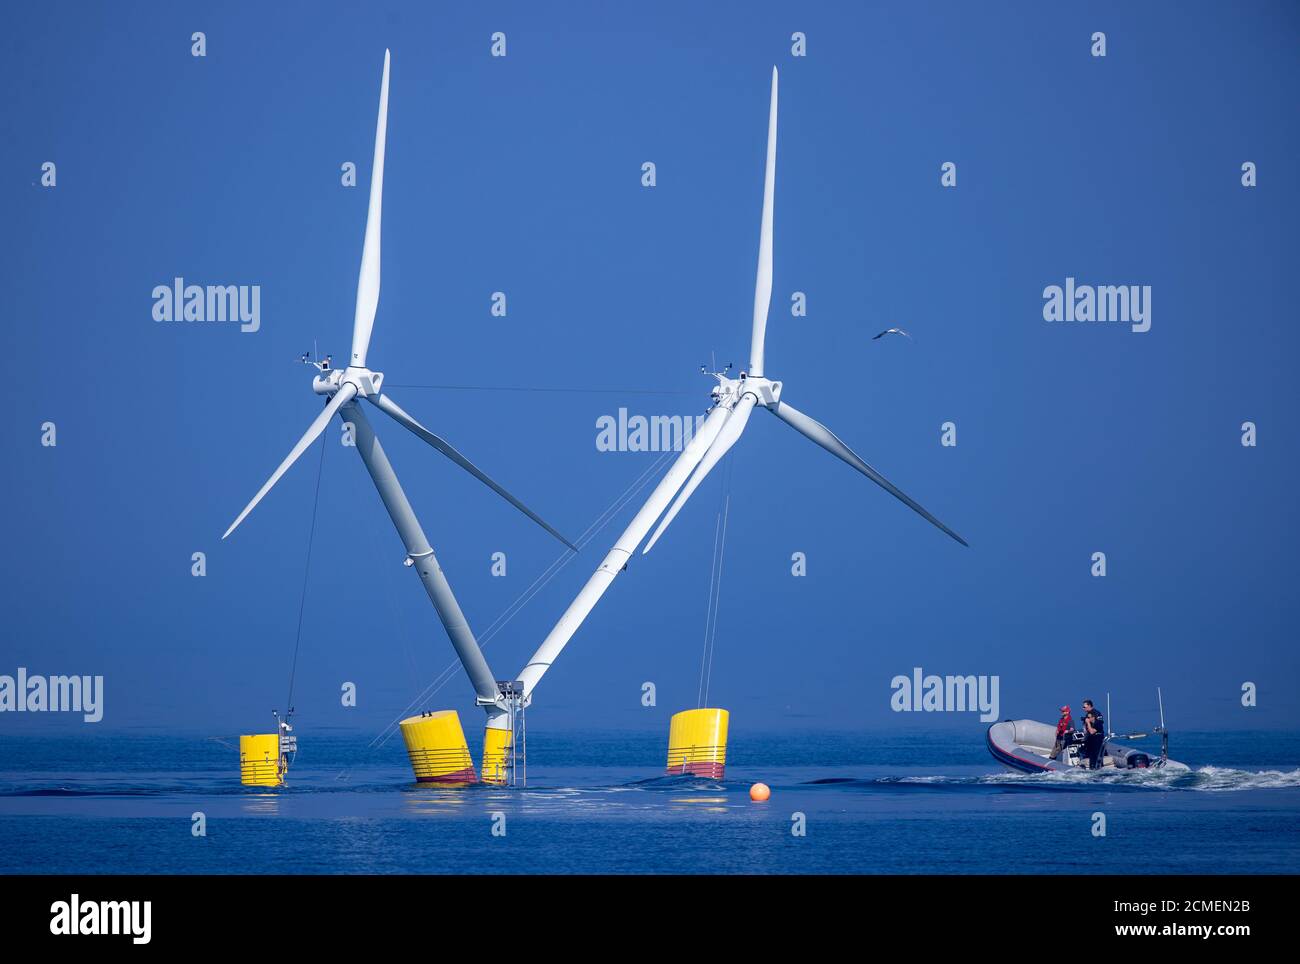 16 September 2020, Mecklenburg-Western Pomerania, Vierow: Fitters anchor the model of a plant with floating wind turbines in the Greifswald Bodden for test series. The energy company EnBW and the Schleswig-Holstein wind turbine manufacturer Aerodyn Engineering now want to test Nezzy2 in the sea with waves. The research project involves a new offshore technology in which the wind turbines float on the water. Until now, offshore turbines have been firmly anchored on steel frames in the seabed. The model plant is equipped with two rotors and is 18 meters high. In later regular operation at sea, t Stock Photo